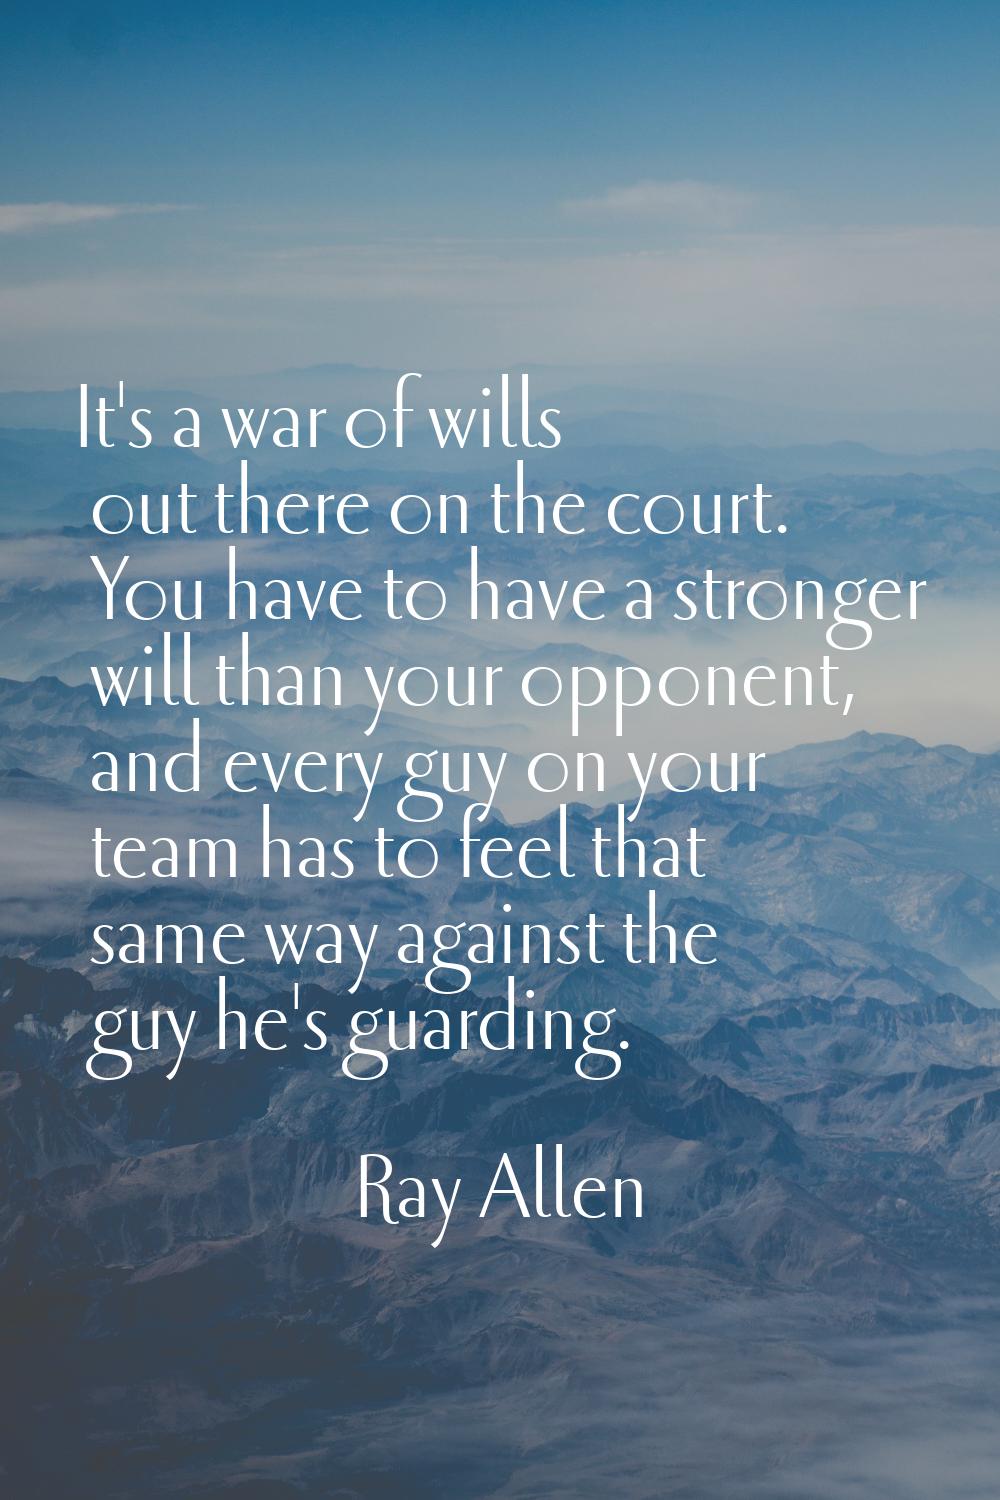 It's a war of wills out there on the court. You have to have a stronger will than your opponent, an